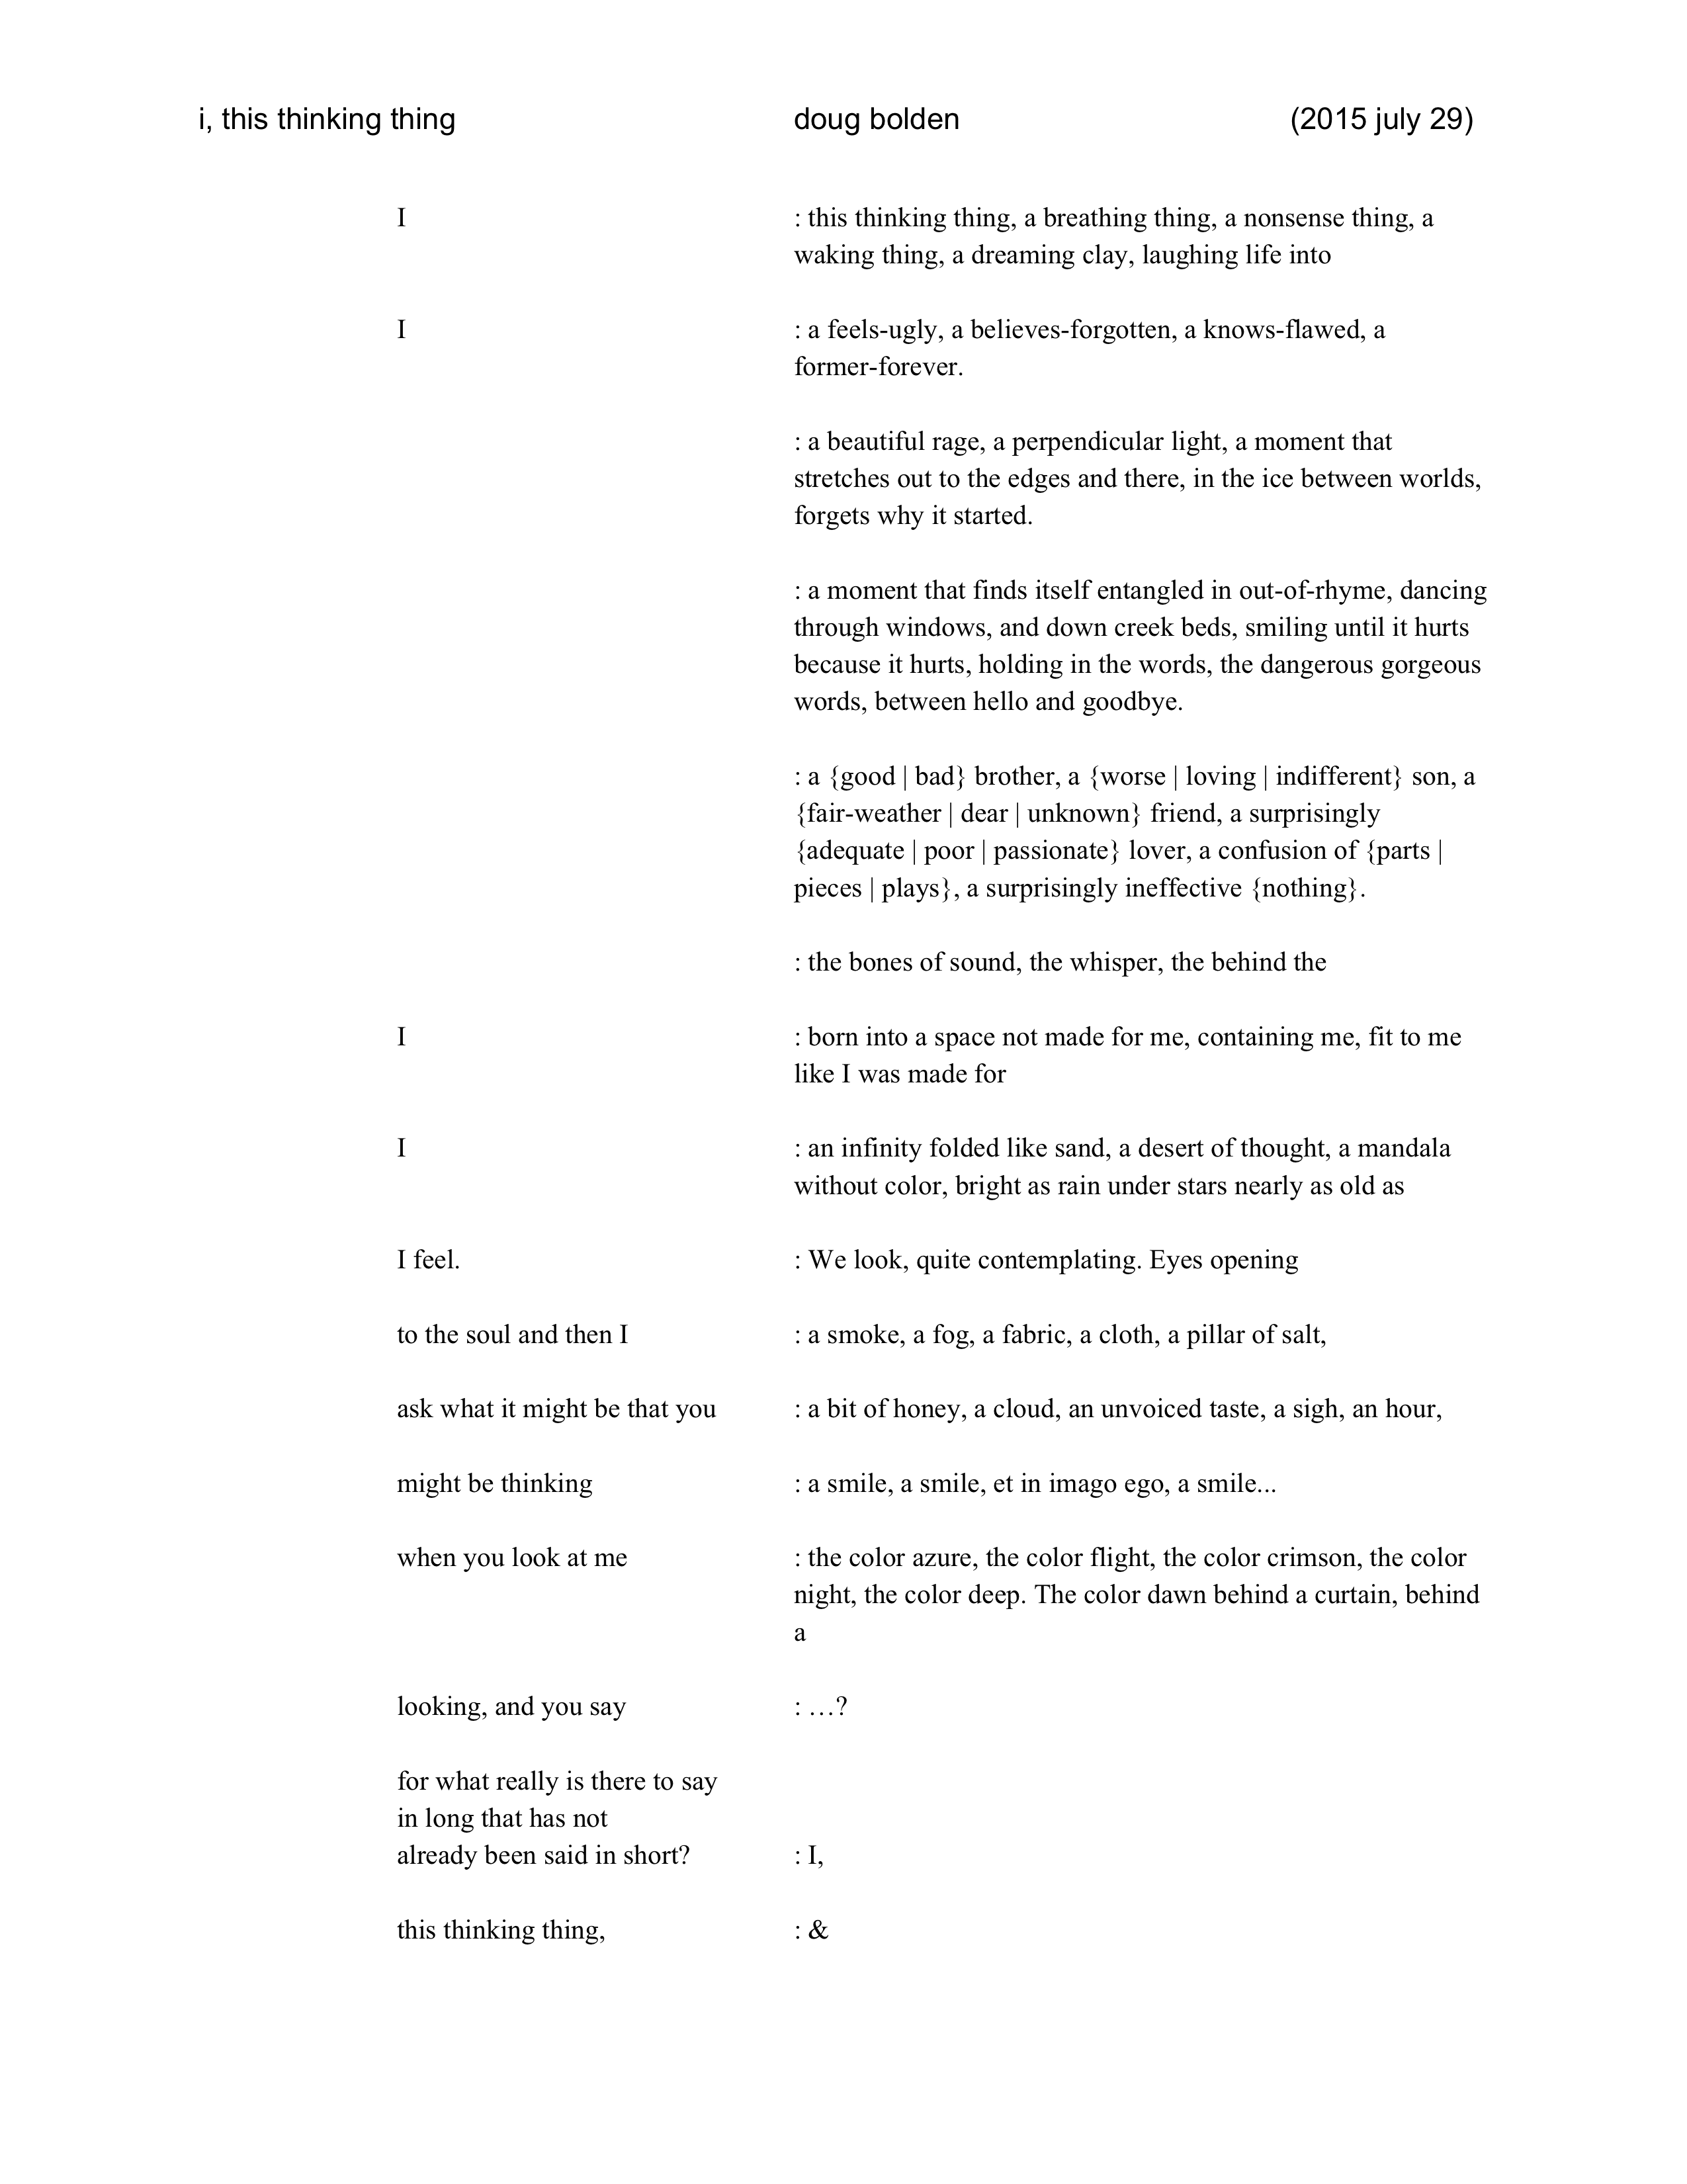 Text of poem, readable via PDF link in this blog post